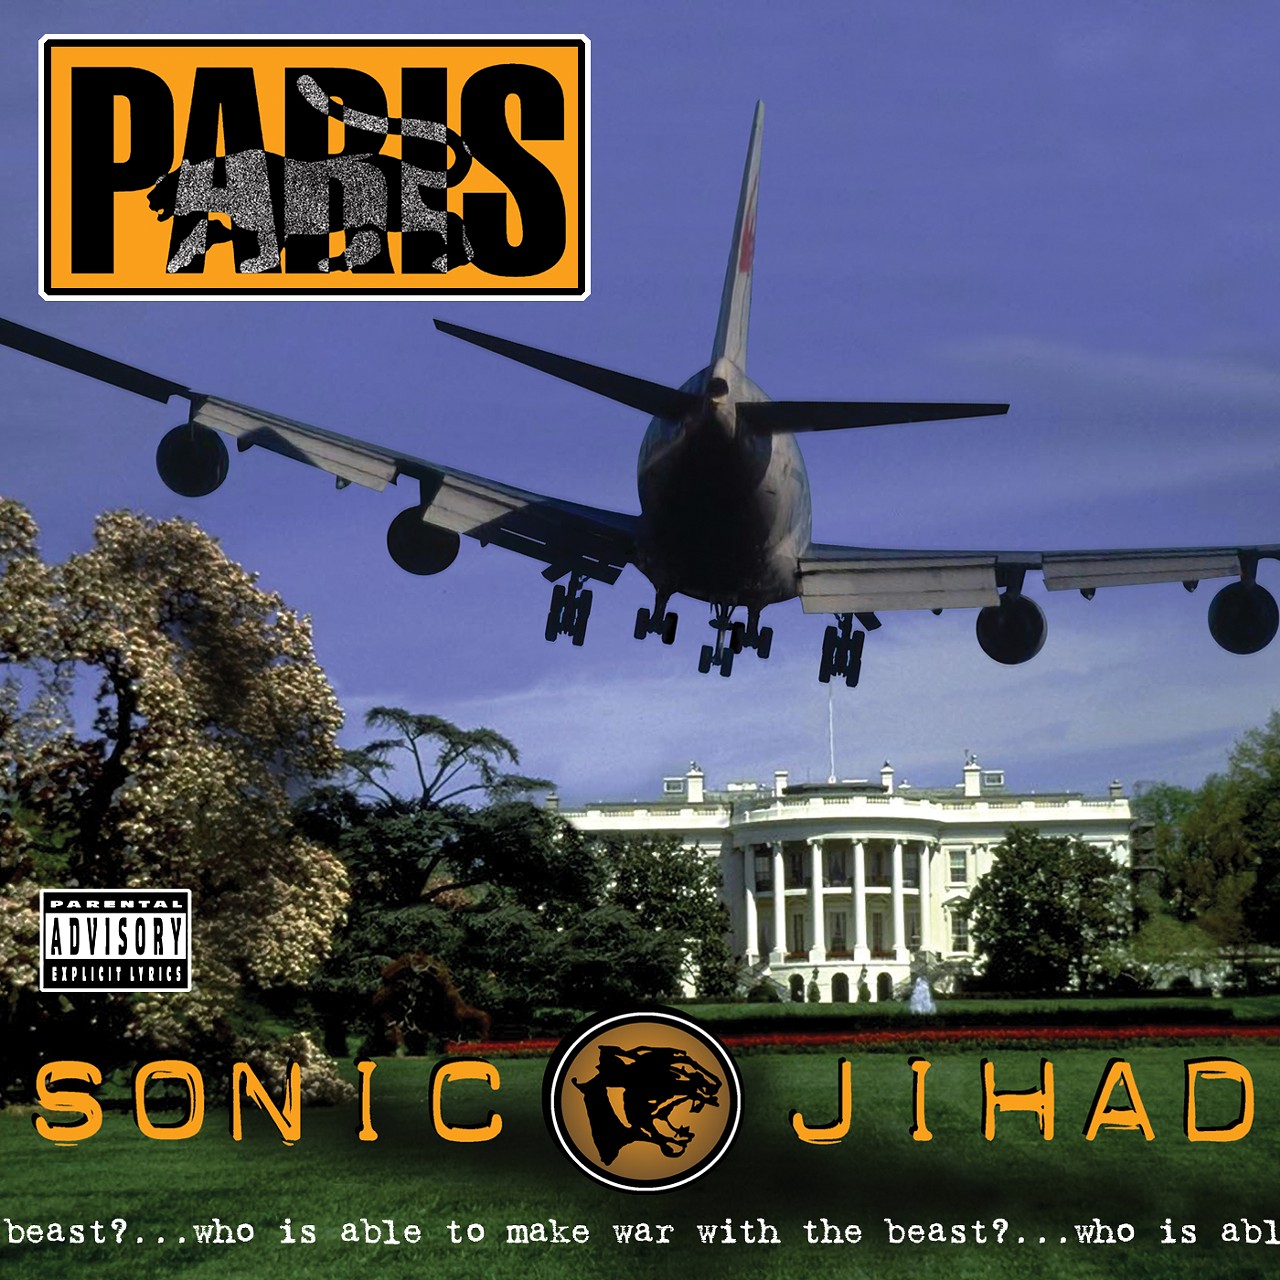 2. You knew 9/11esque iconography was coming. And Paris delivers with "Sonic Jihad," where a jetliner appears to be on course to slam into the White House. But don't get upset just yet...the cover in our #1 slot is similar, but worse.